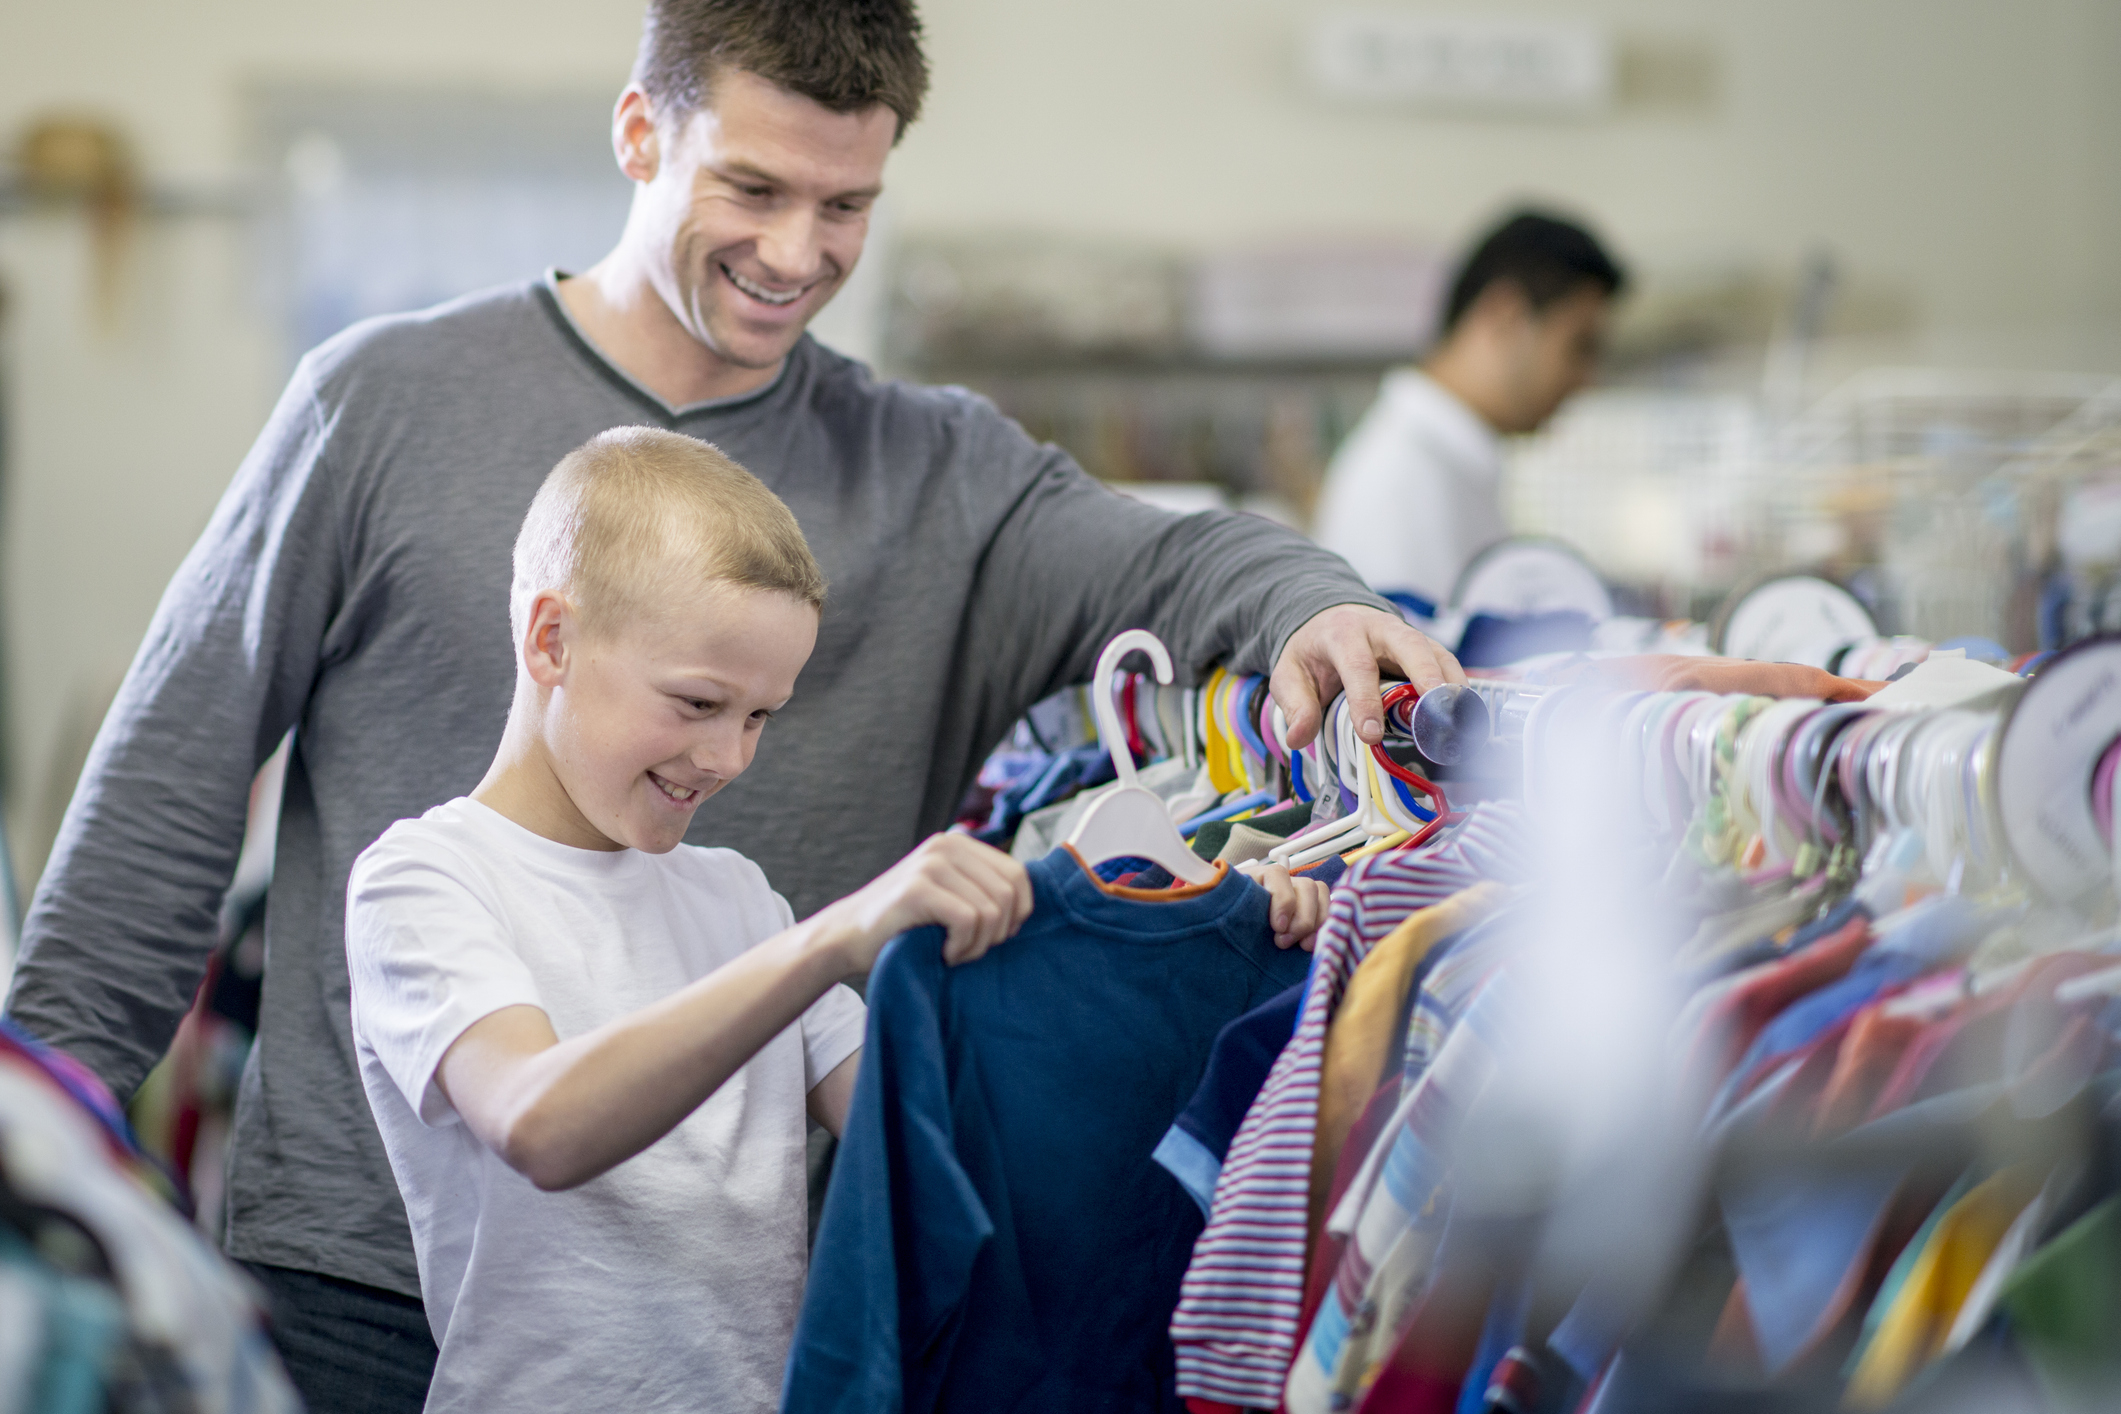 Adult and child smiling, selecting clothes from a rack in a thrift store setting